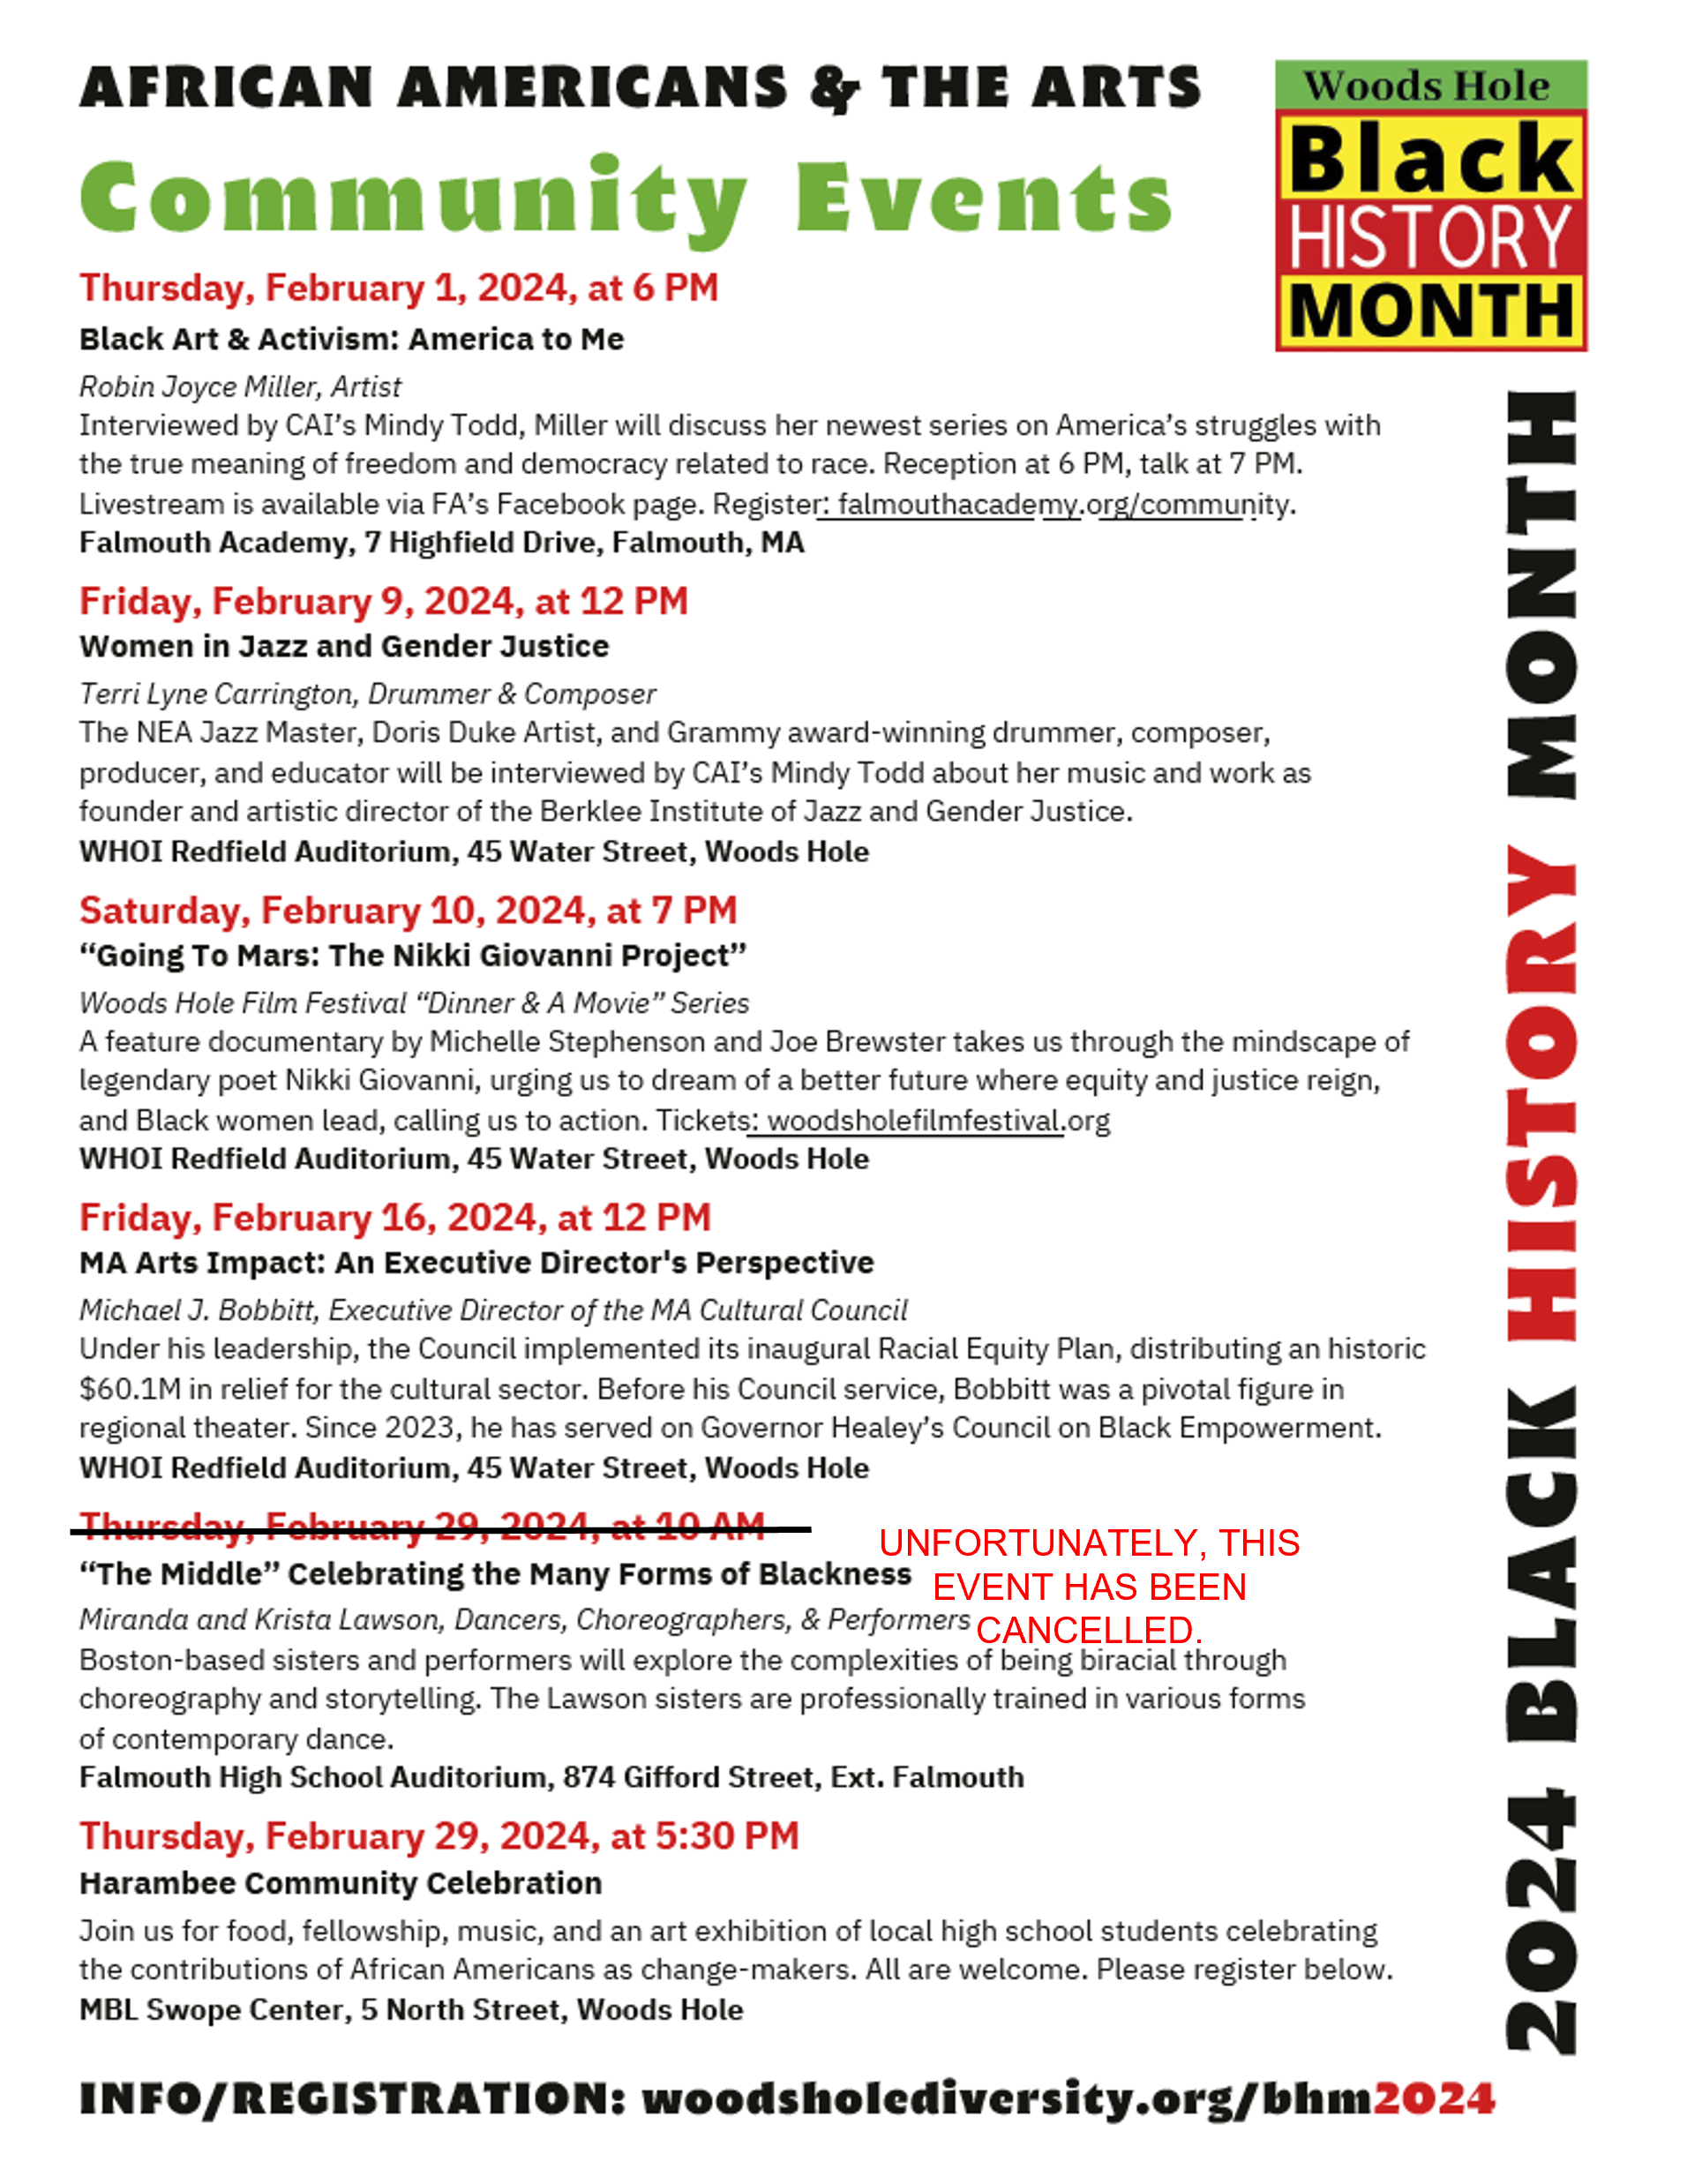 BHM 2024 EVENT FLYER WITH CANCELLATION